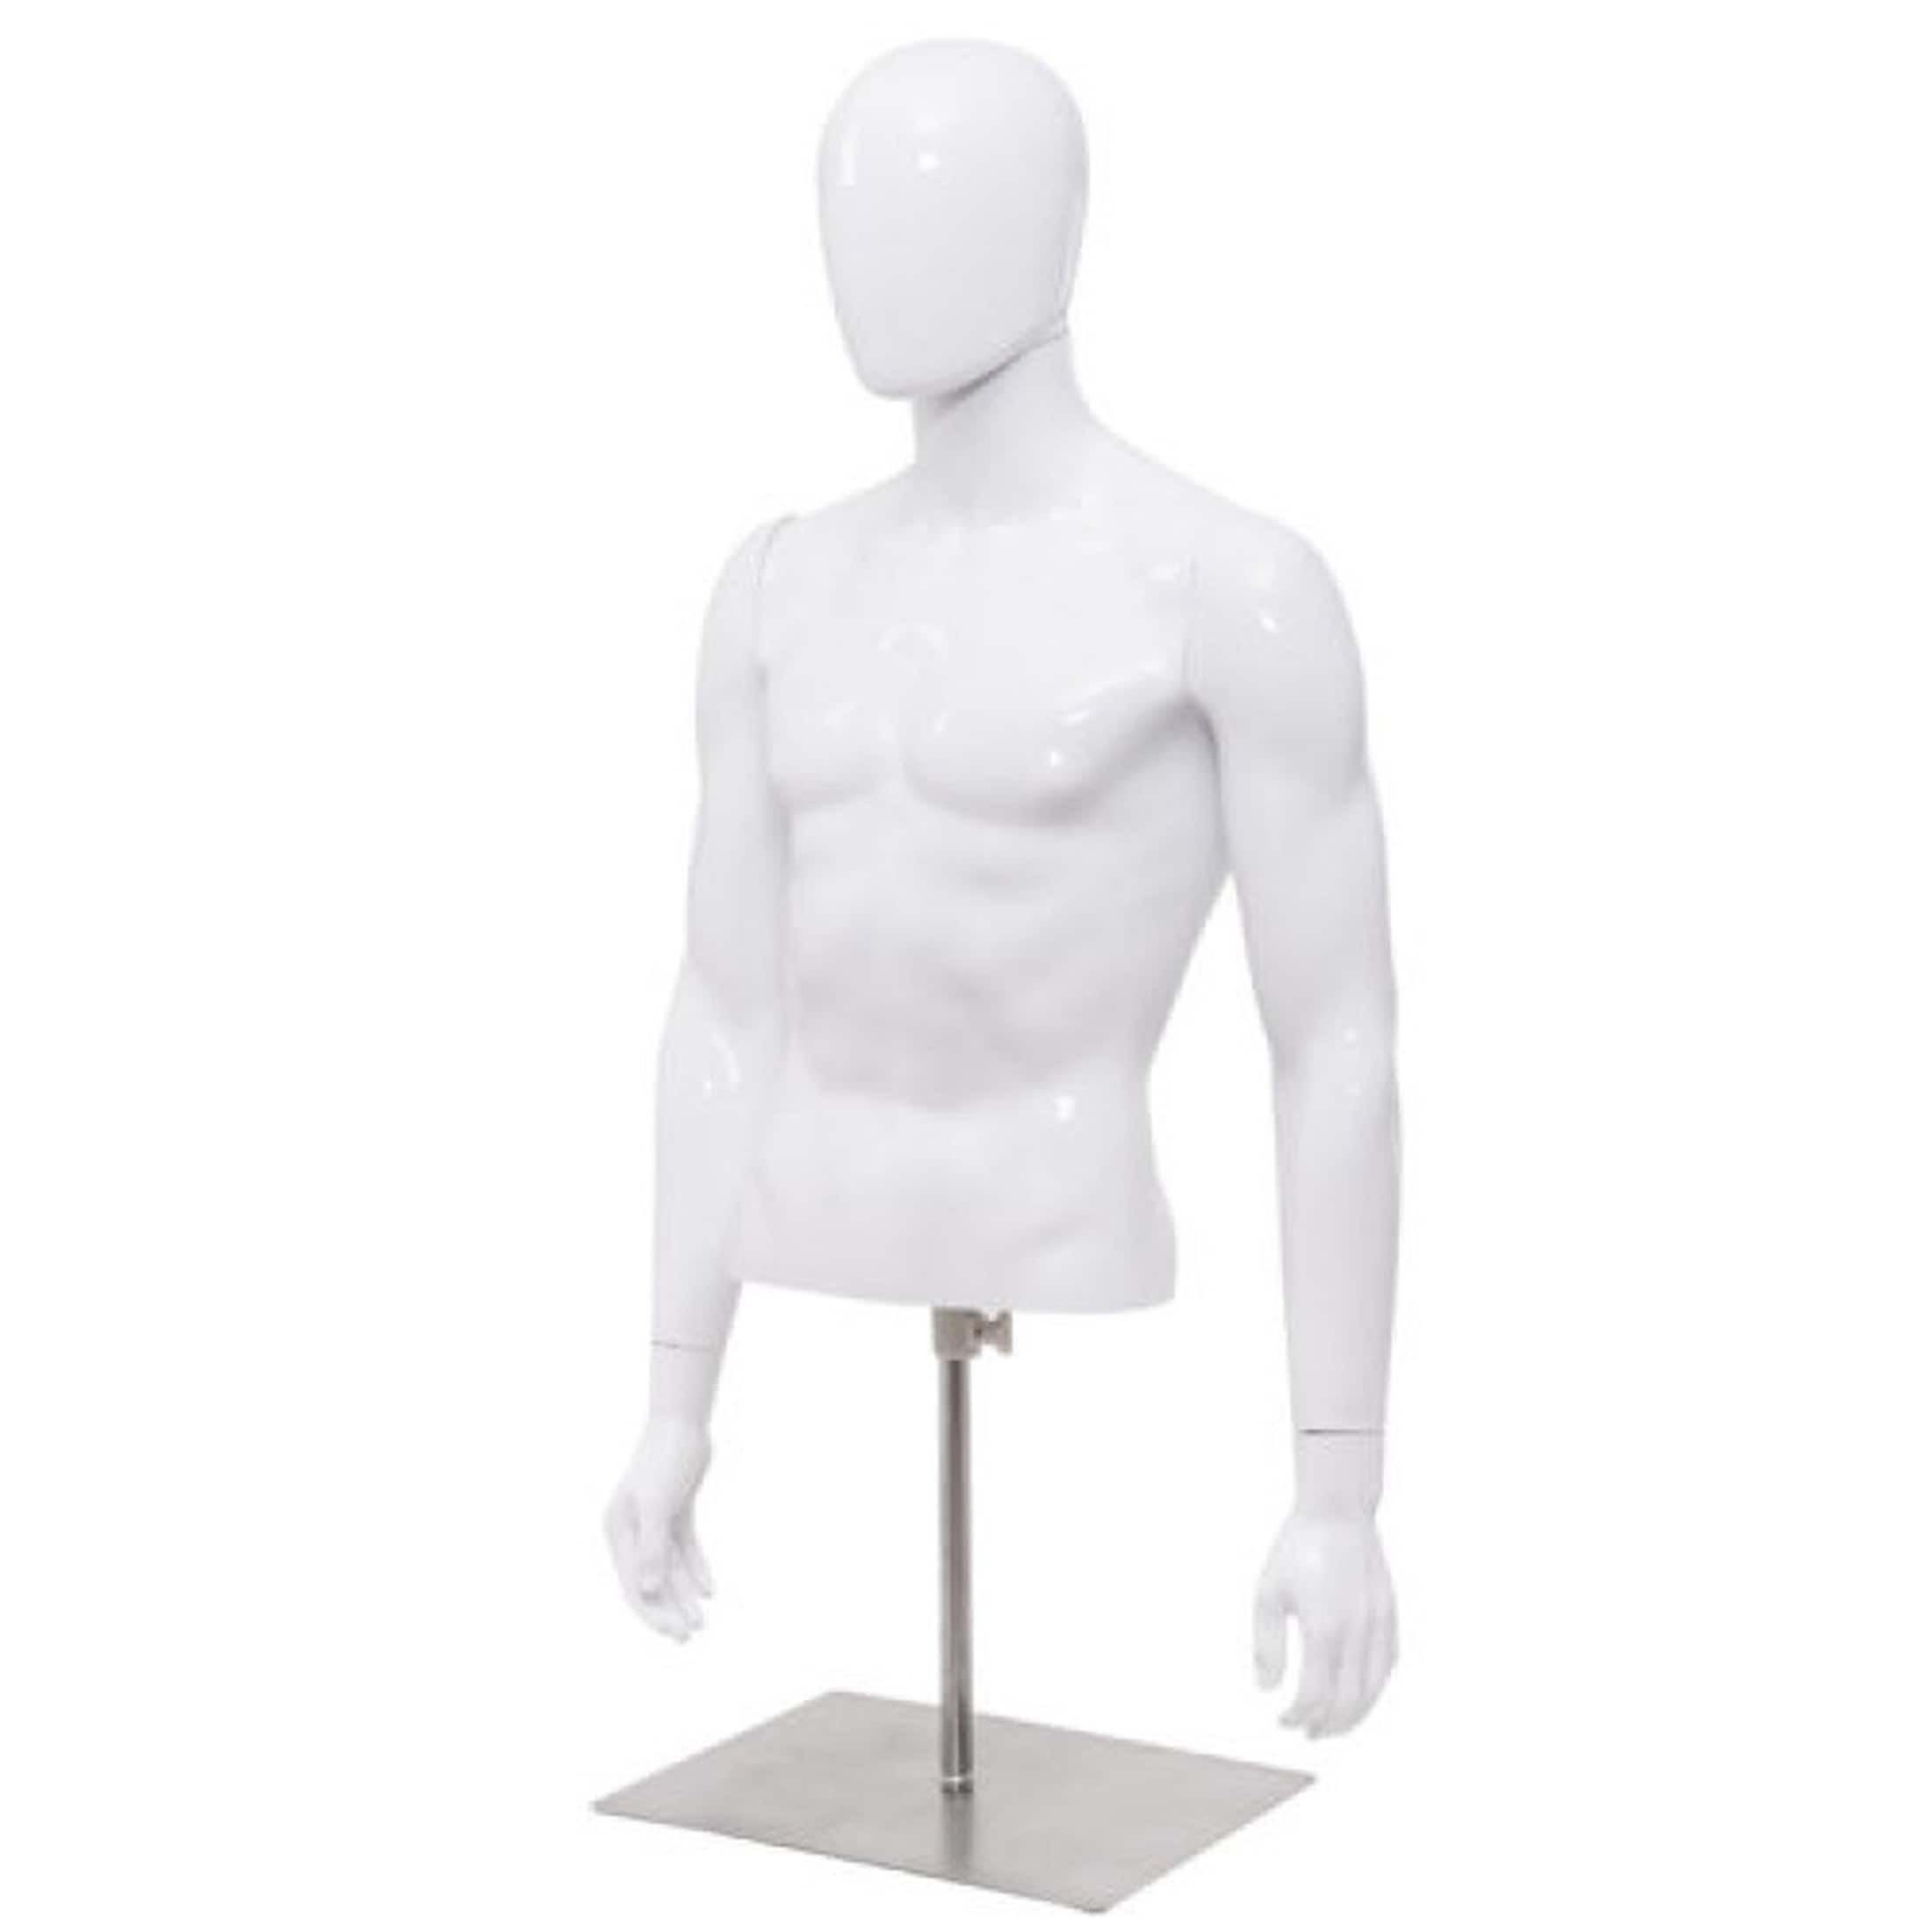 Metal Mannequin Stand - Bed Bath & Beyond - 9115516